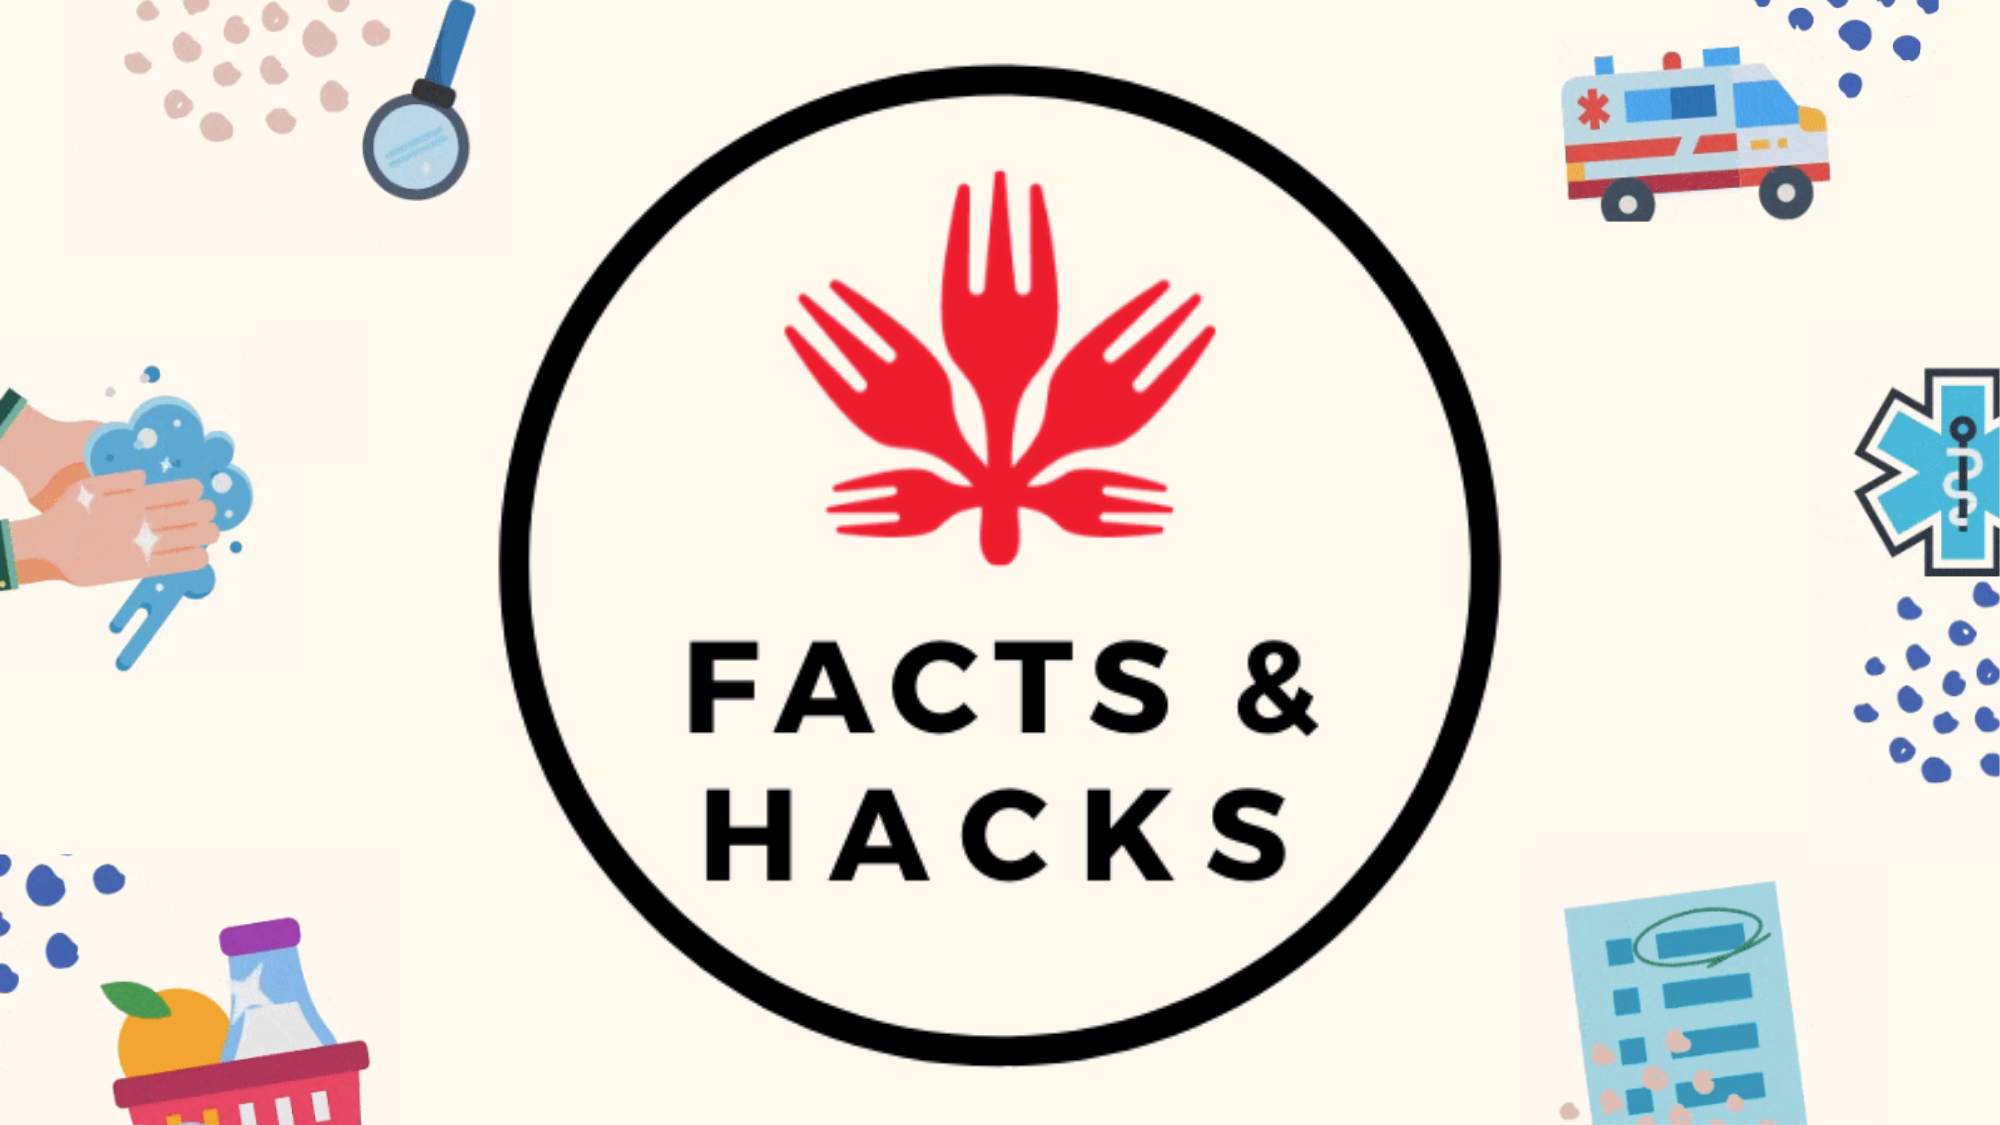 FACTS AND HACKS images